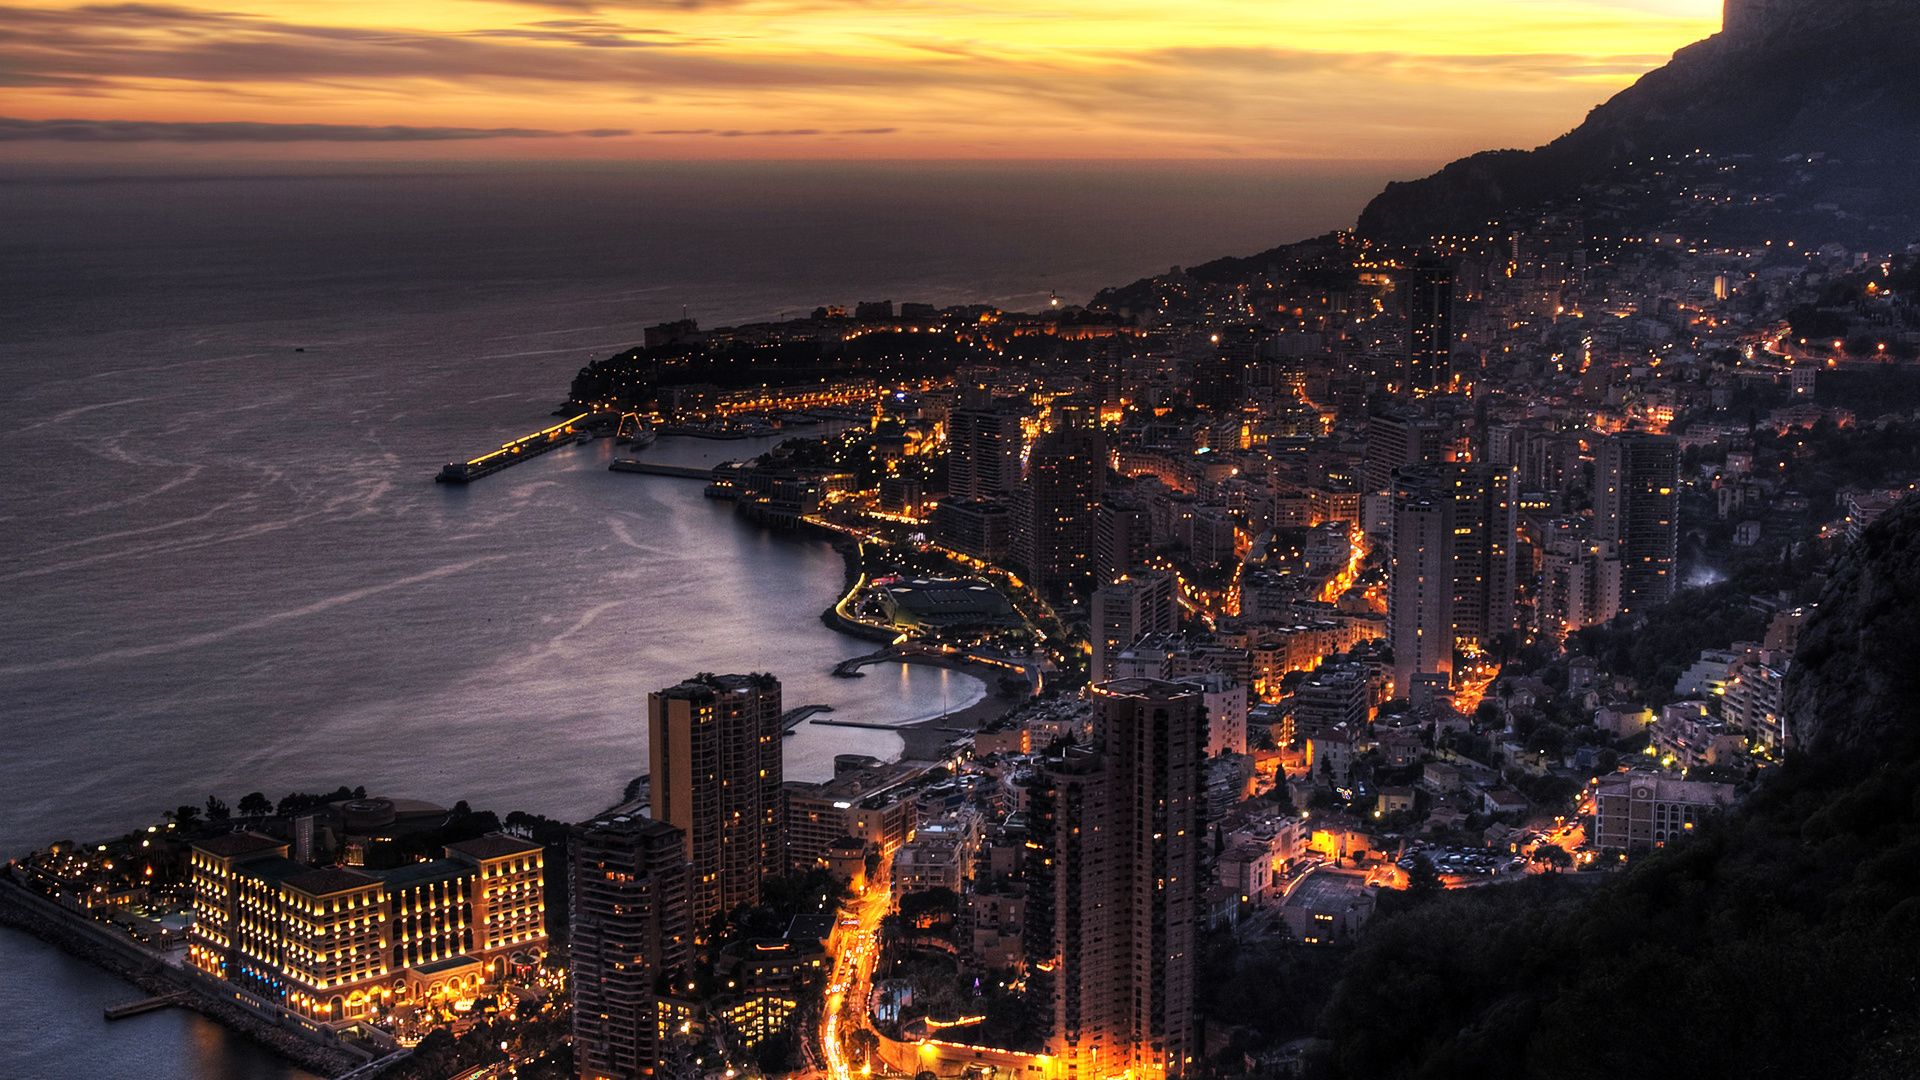 View from the hill on the Monaco wallpaper - Beach Backgrounds